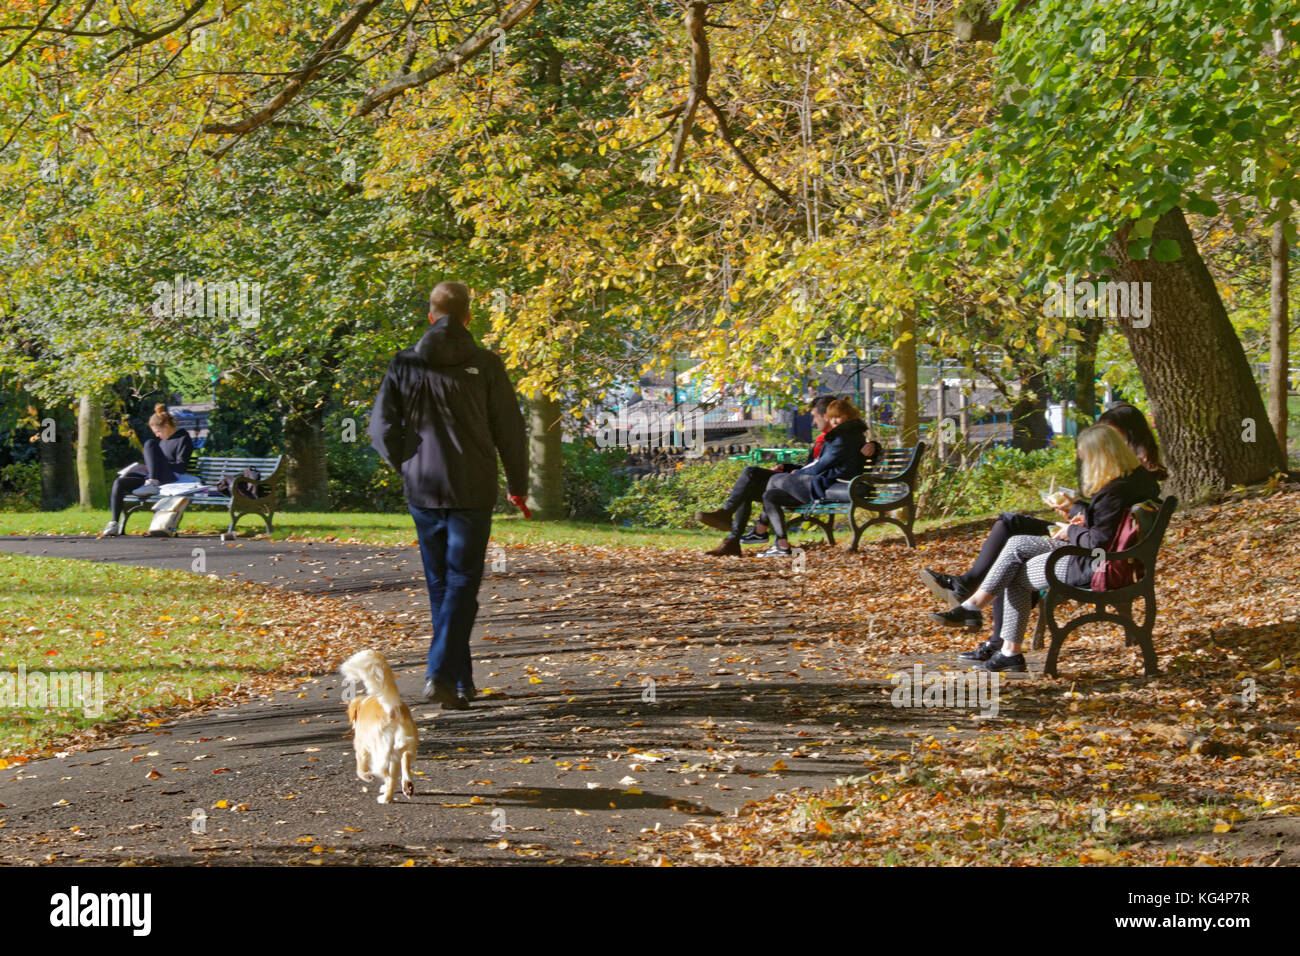 dog walker in Kelvingrove Park sunny day with autumn leafs sitting on bench with people in the background viewed from behind in perspective Stock Photo